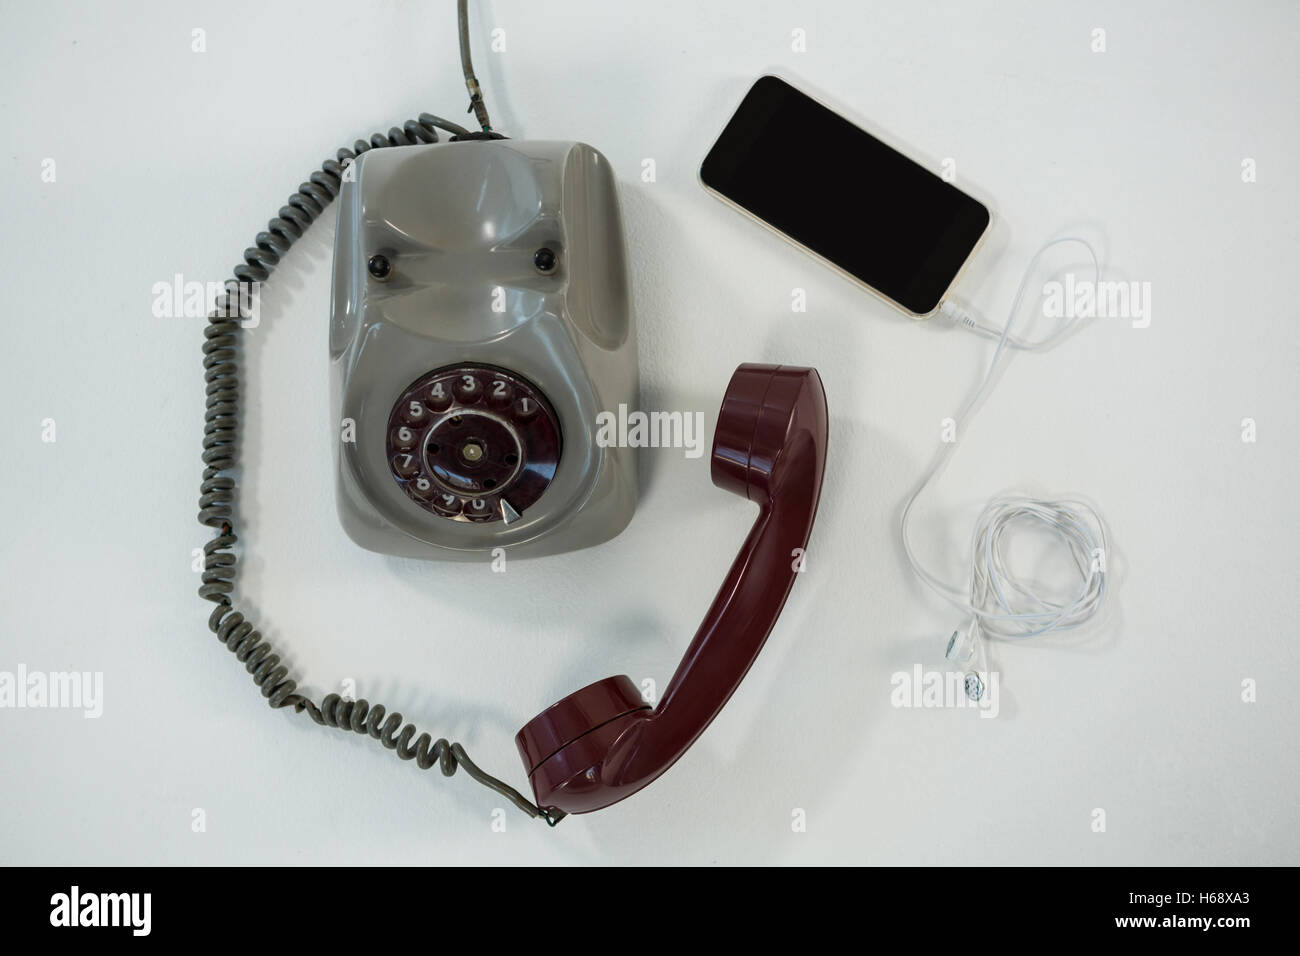 Old and modern technology concept Stock Photo